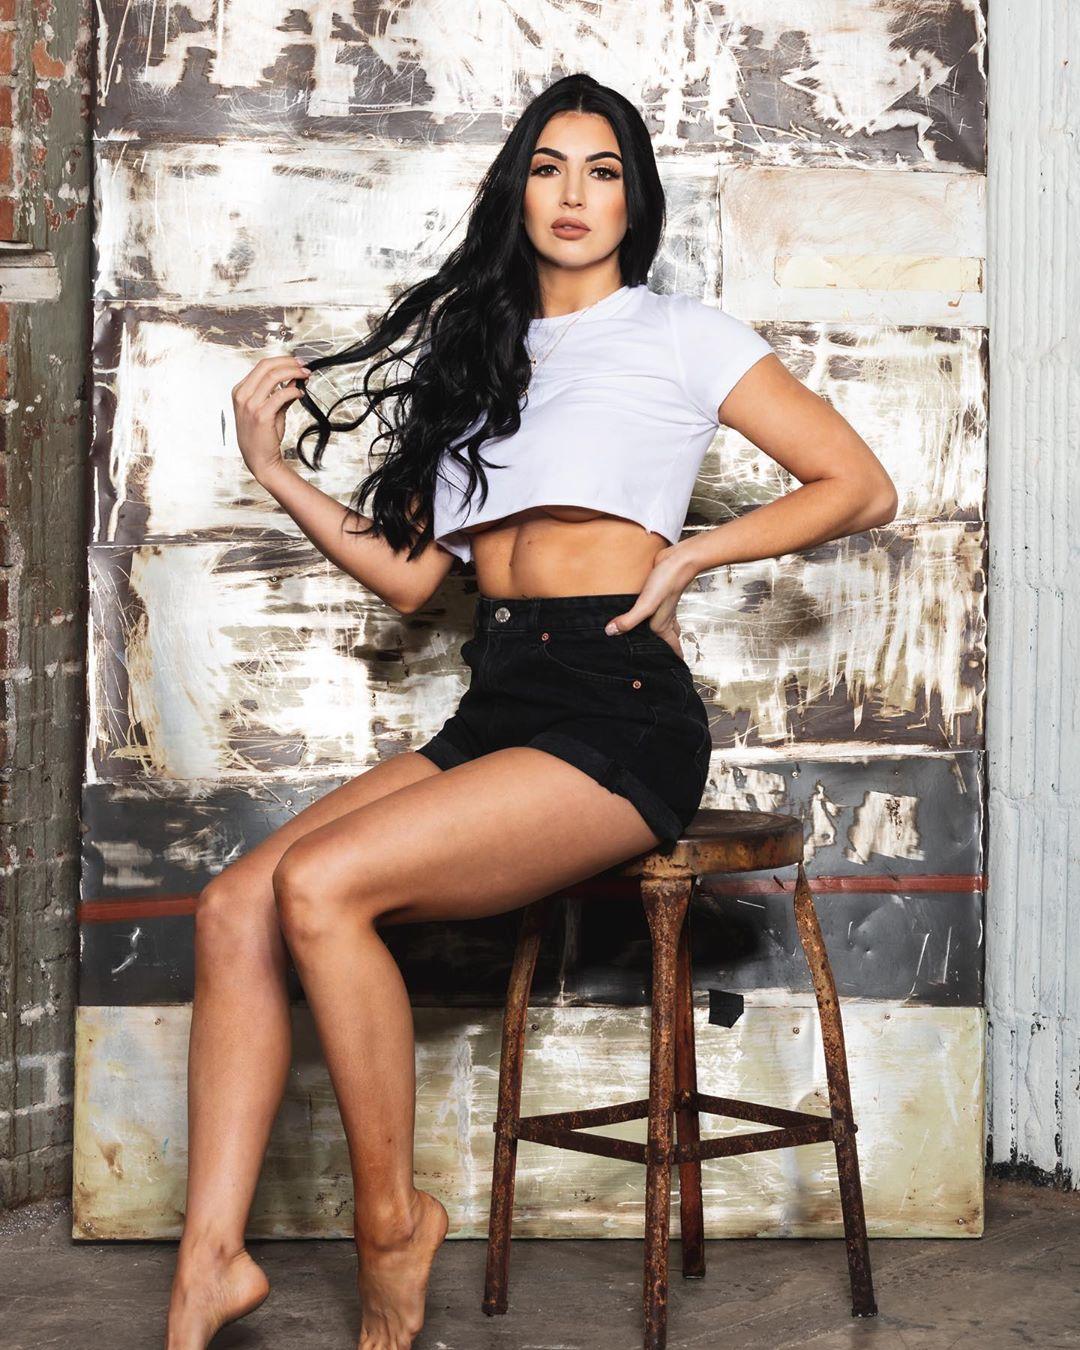 60+ Hot Pictures Of Billie Kay Will Rock The WWE Fan Inside You 250